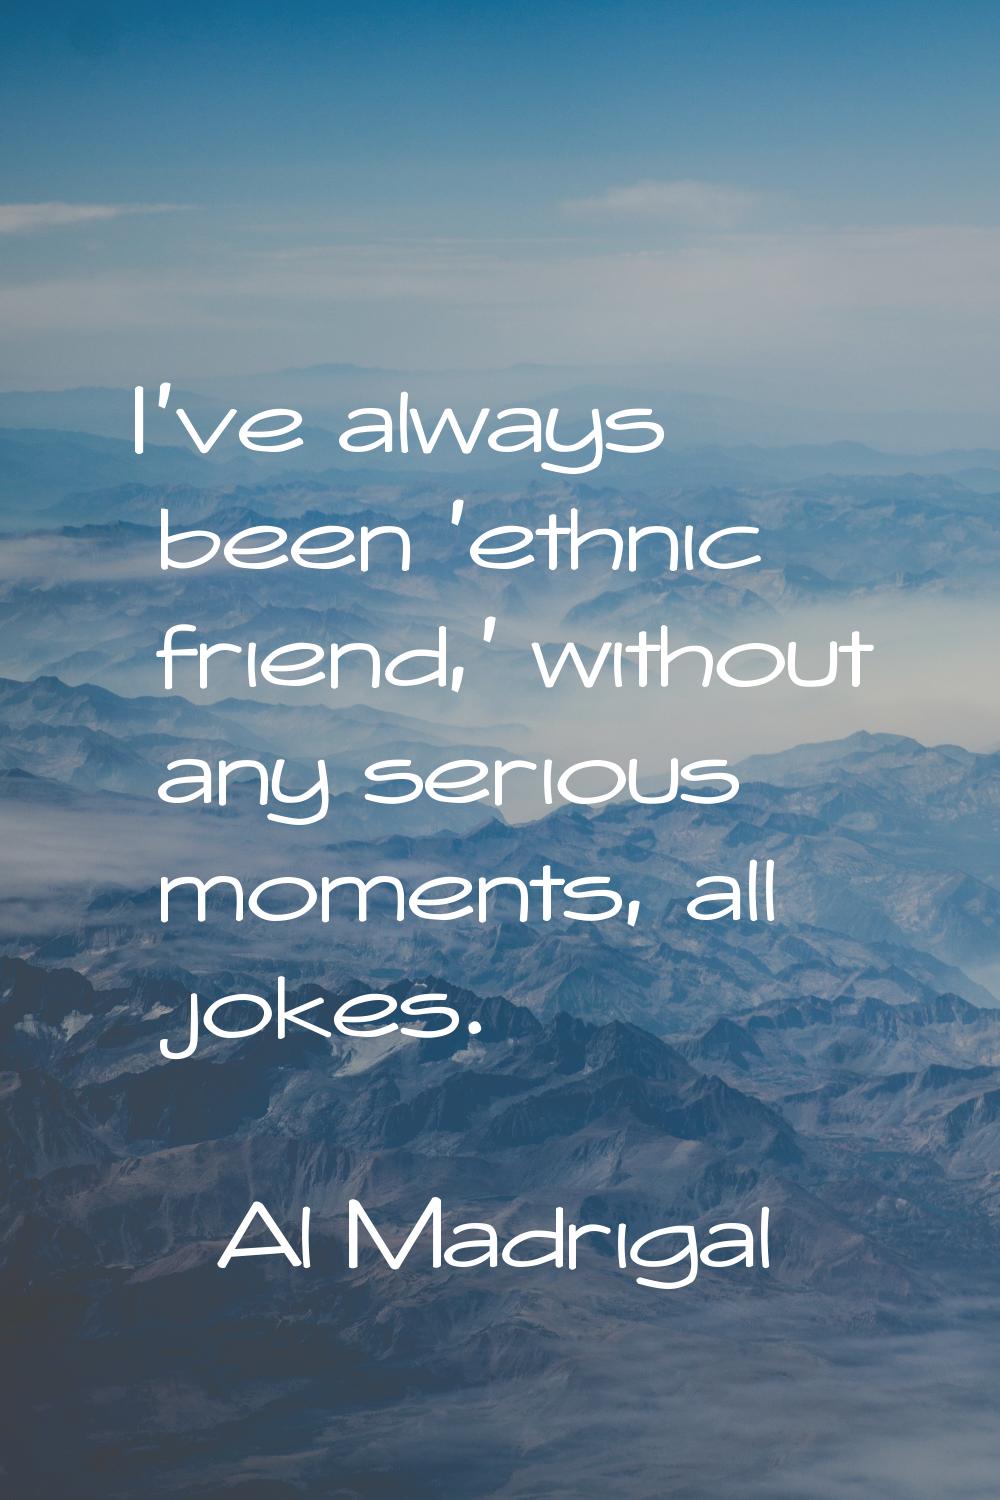 I've always been 'ethnic friend,' without any serious moments, all jokes.